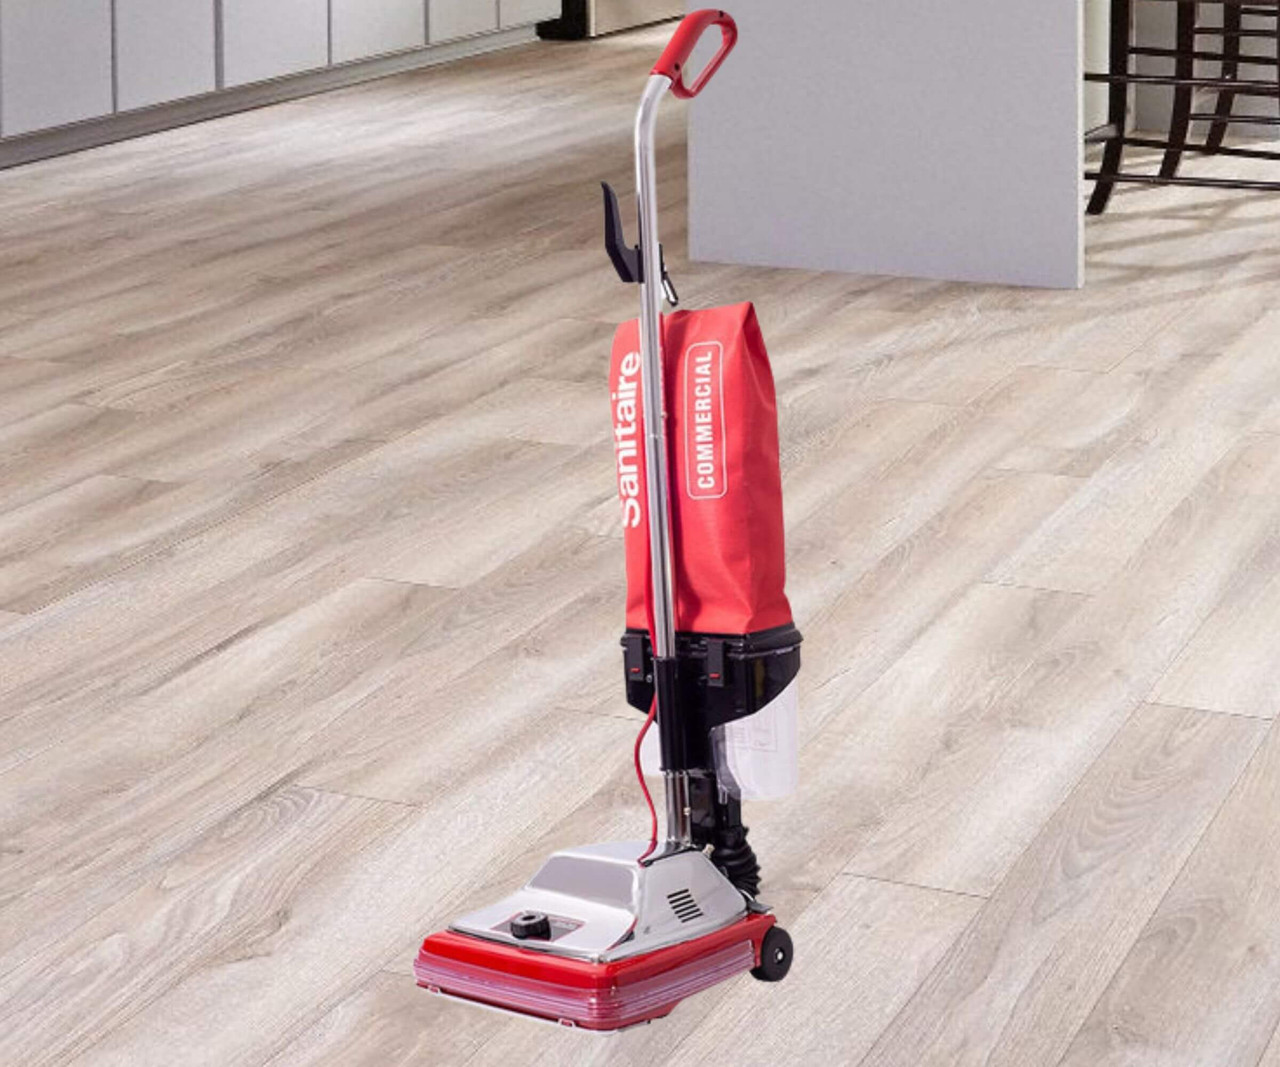 Sanitaire TRADITION 12" Upright Vacuum Cleaner with Dirt Cup - 840W | Efficient Cleaning with Easy Maintenance